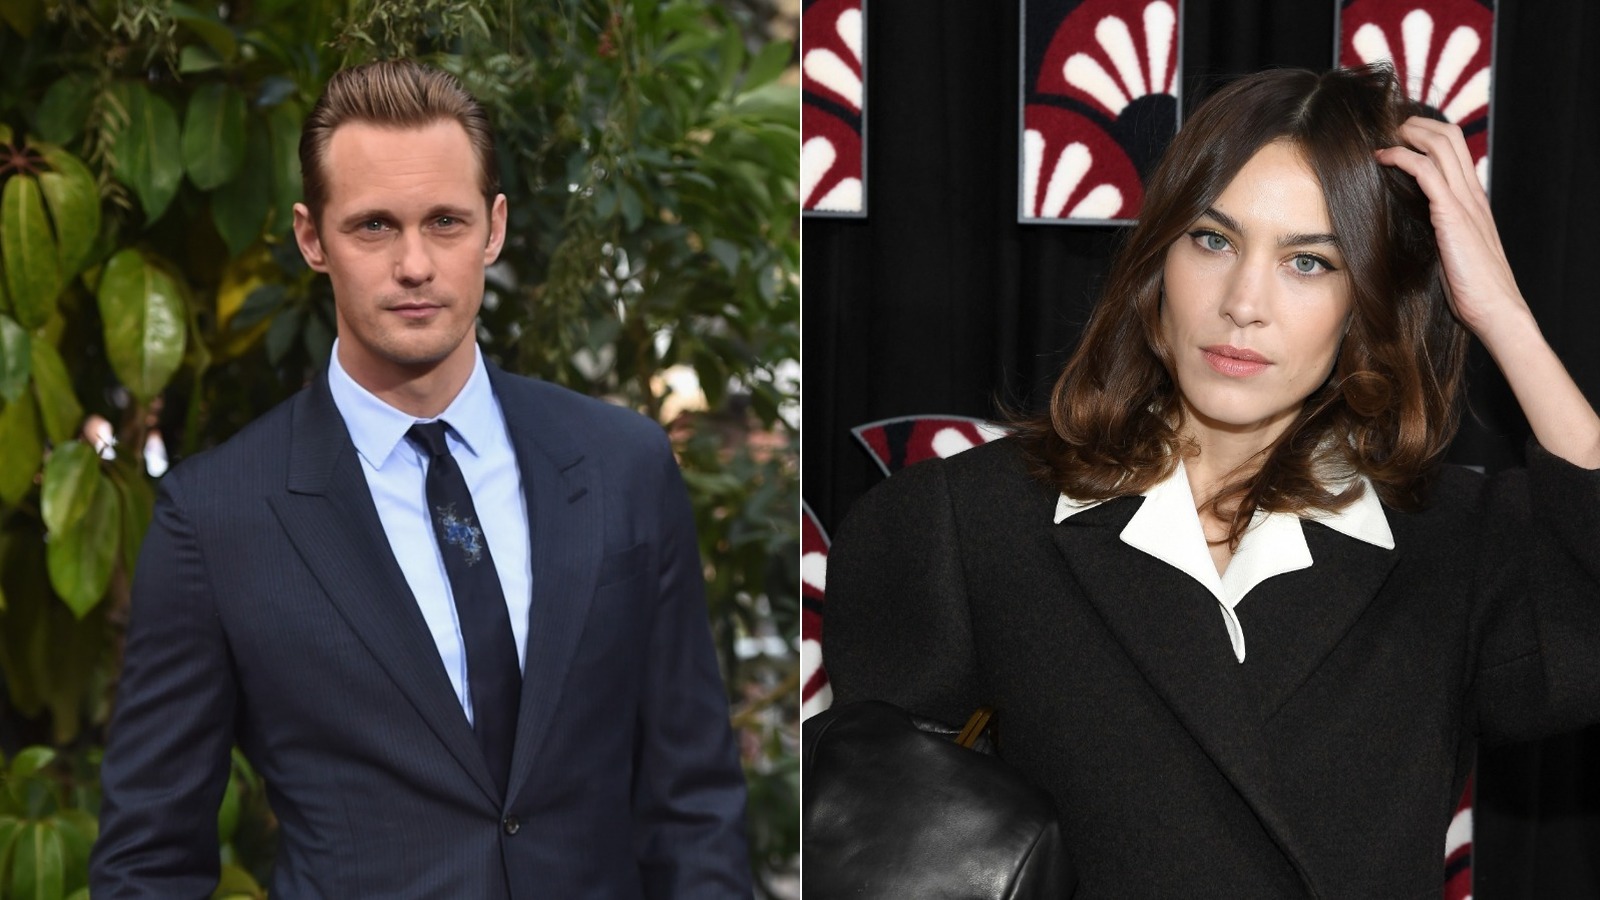 The Truth About Alexander Skarsgard'S Relationship With Alexa Chung